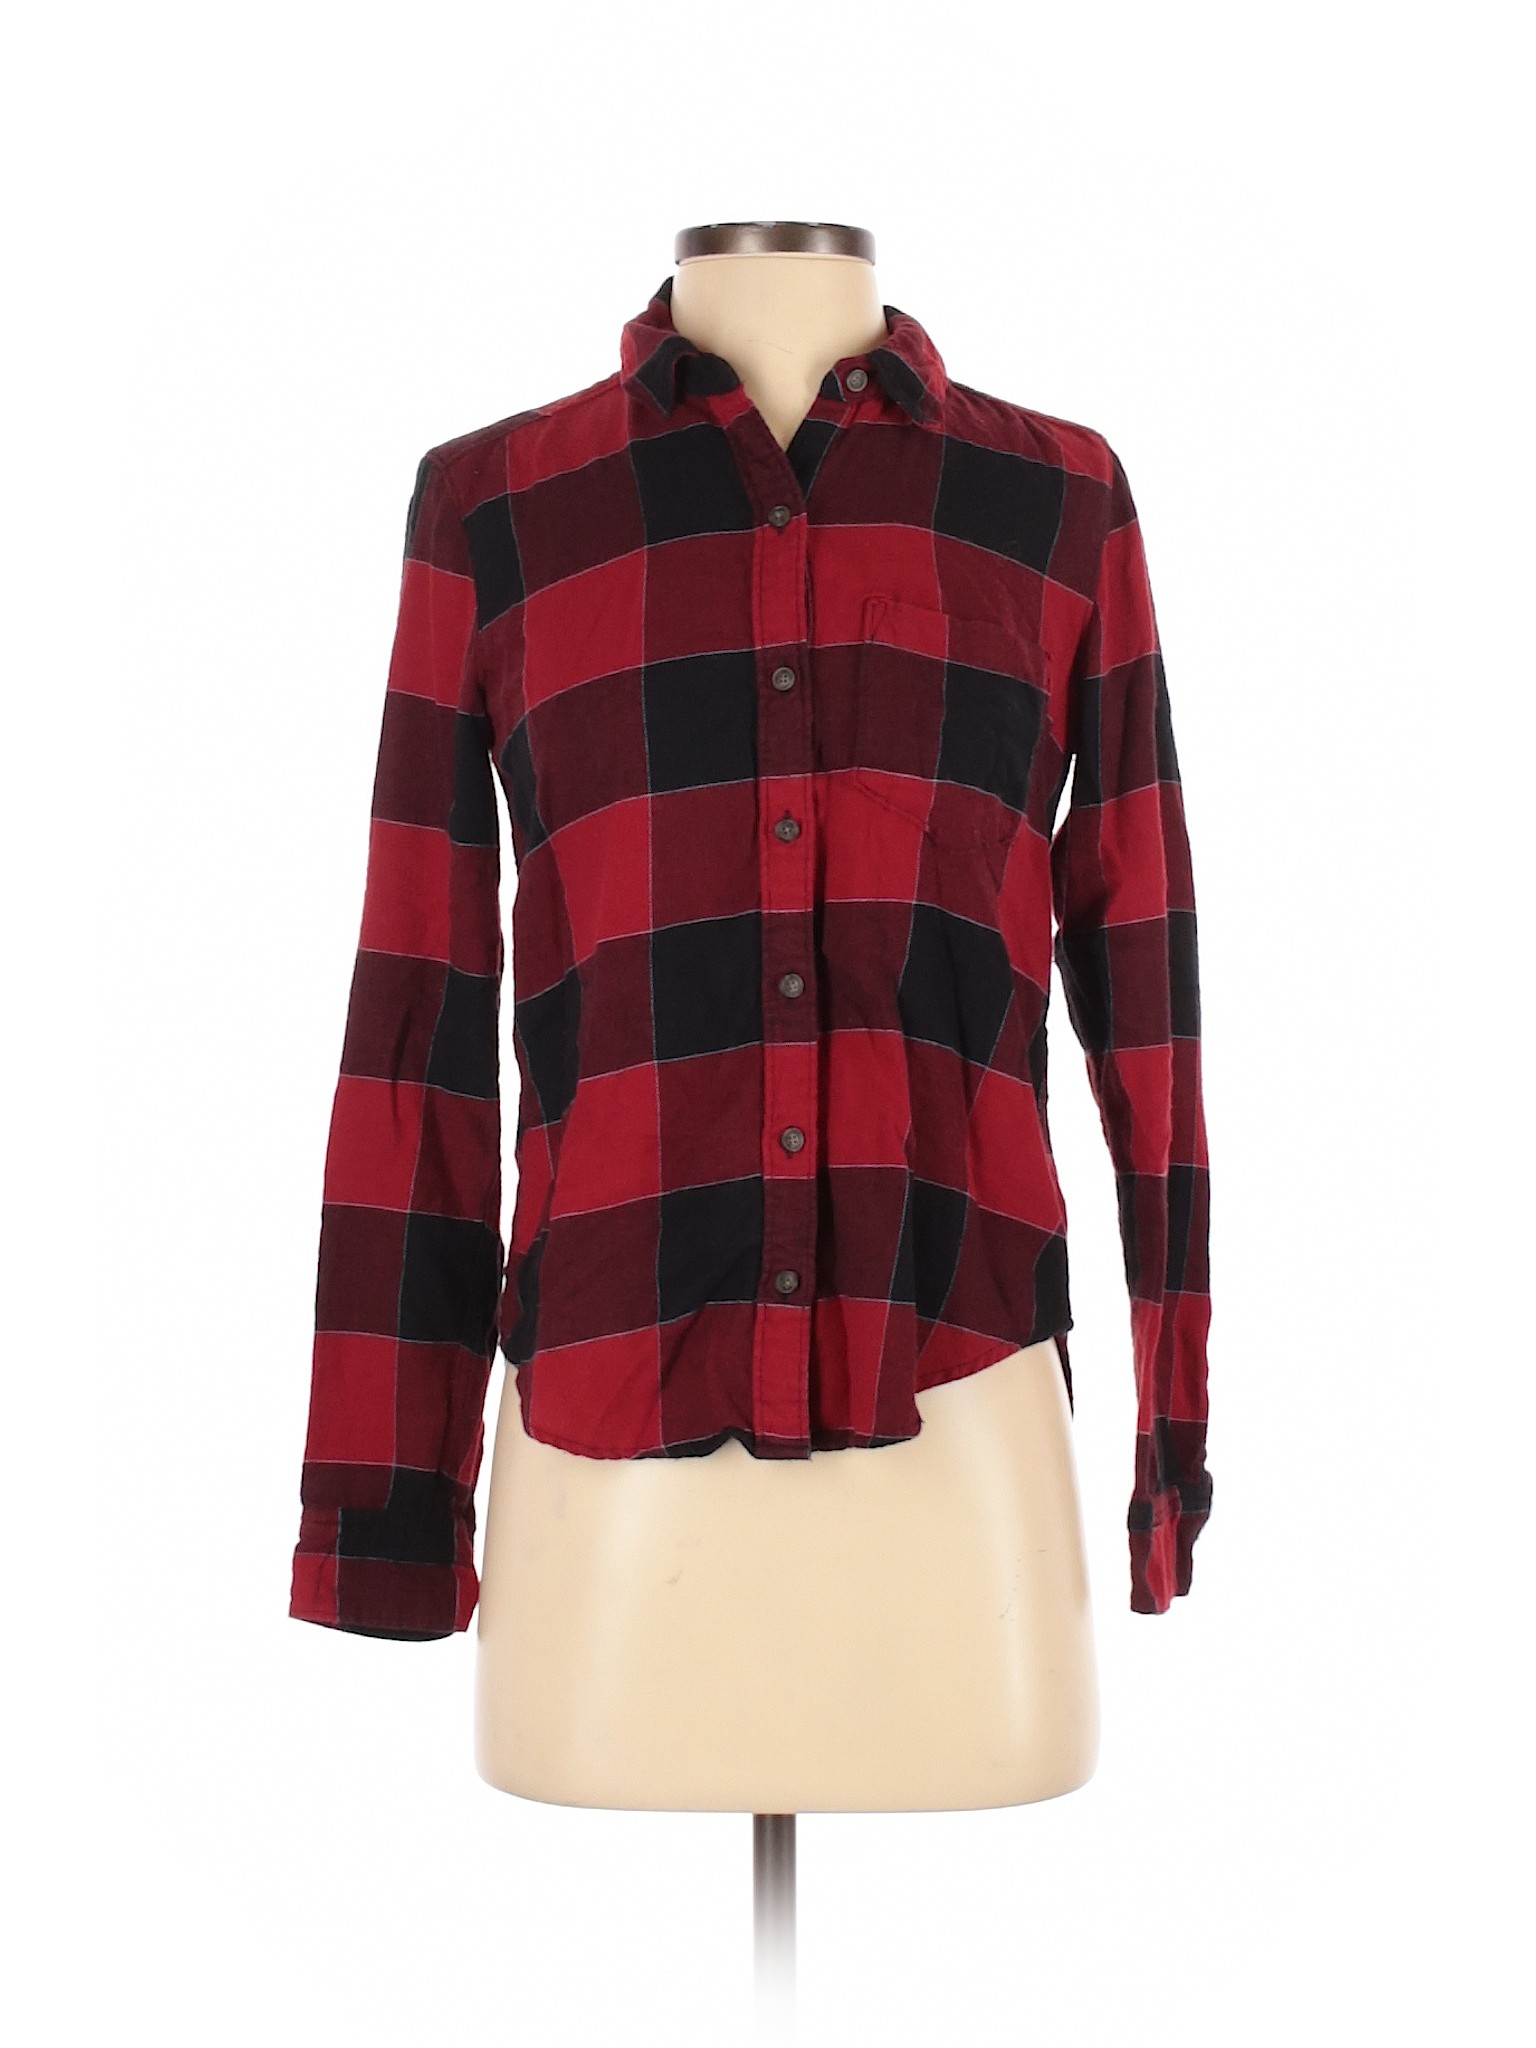 Abercrombie & Fitch Women Red Long Sleeve Button-Down Shirt XS | eBay